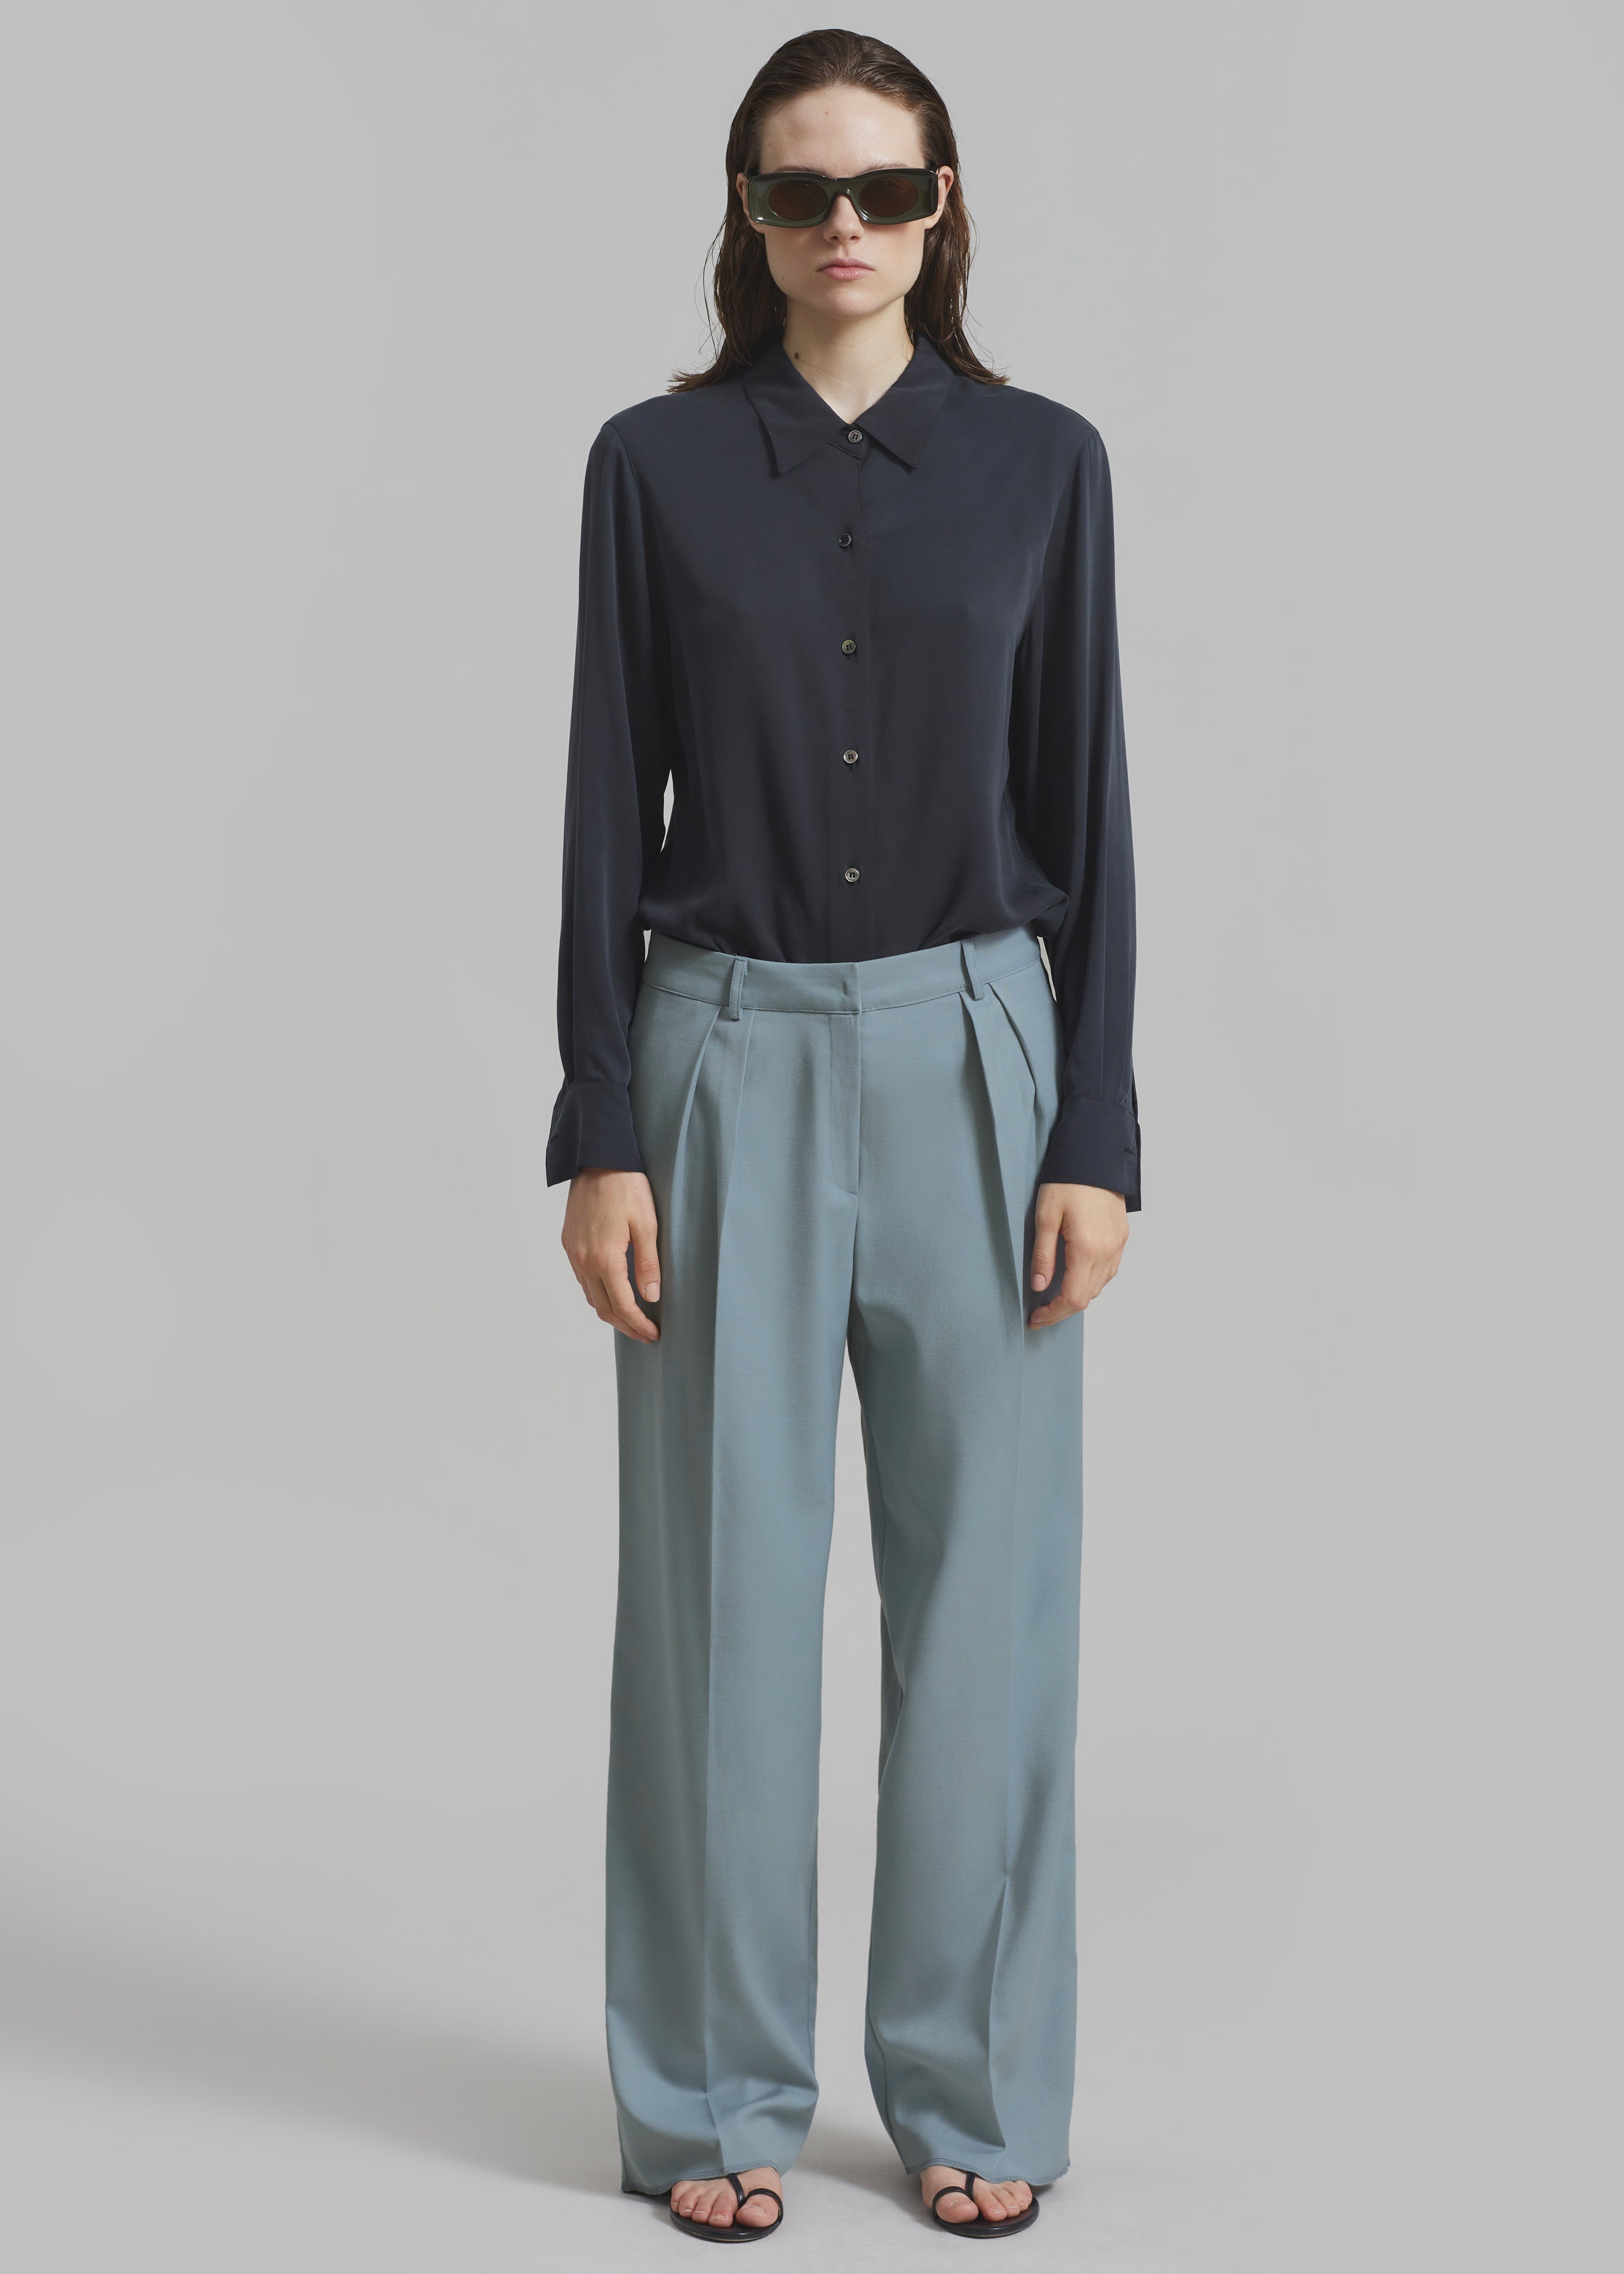 Spencer Pleated Pants - Dusty Blue - 14